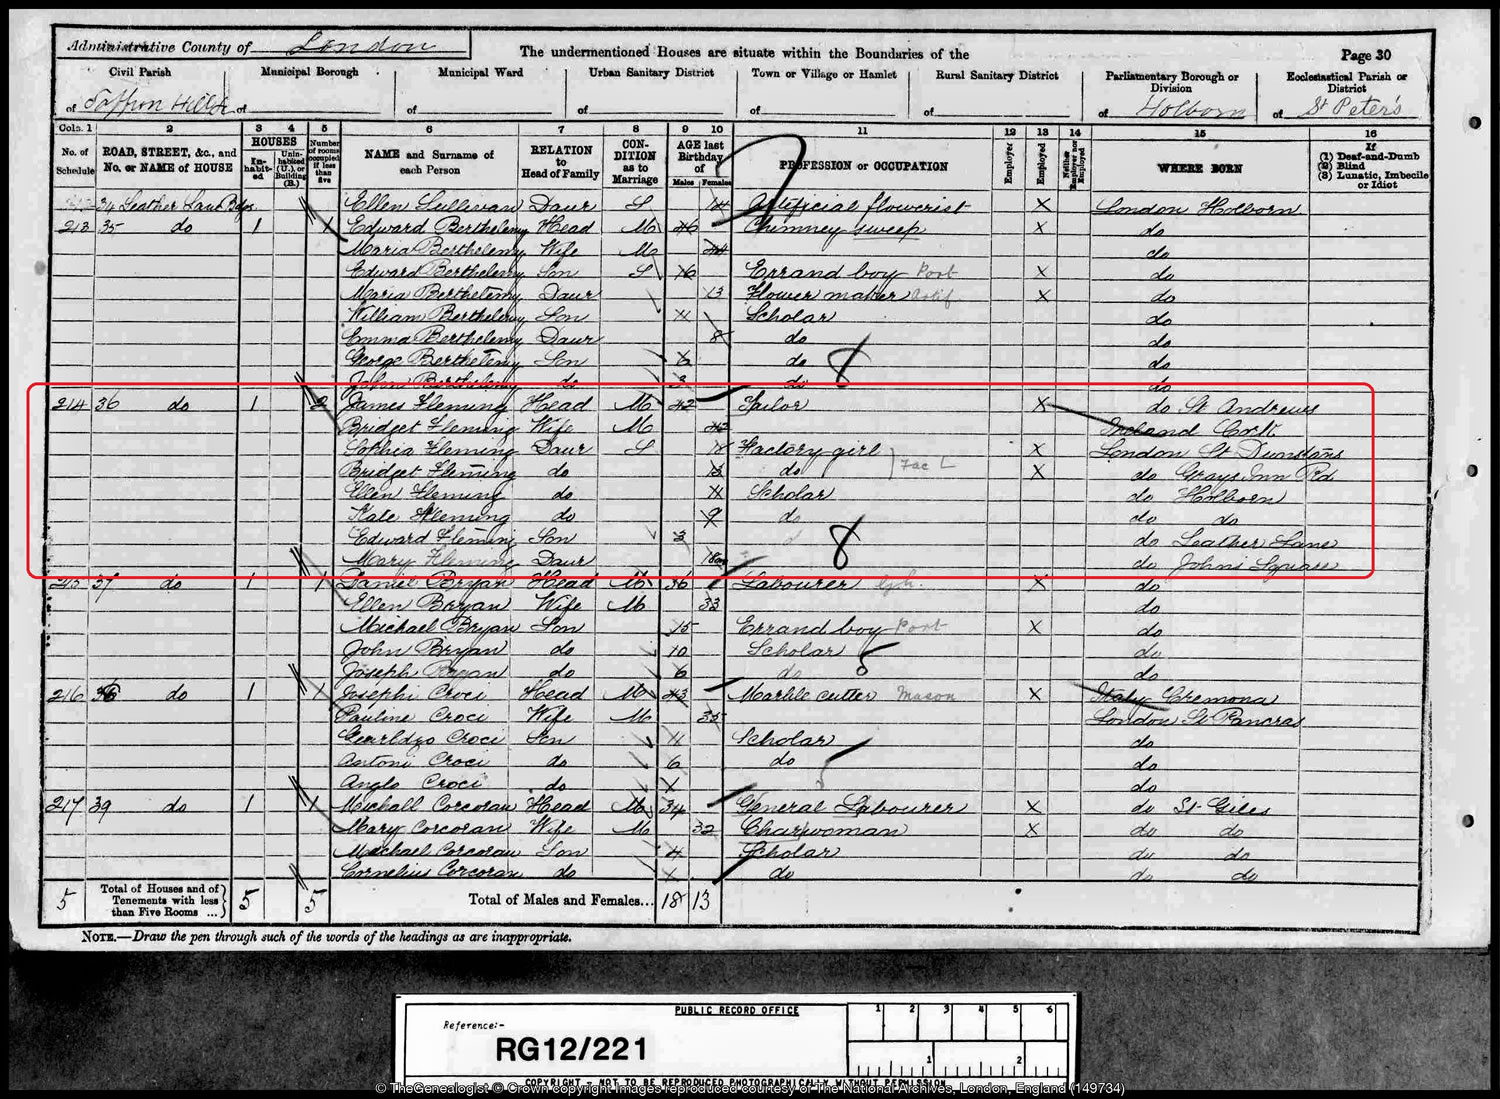 1891 census of St Peter's area of London